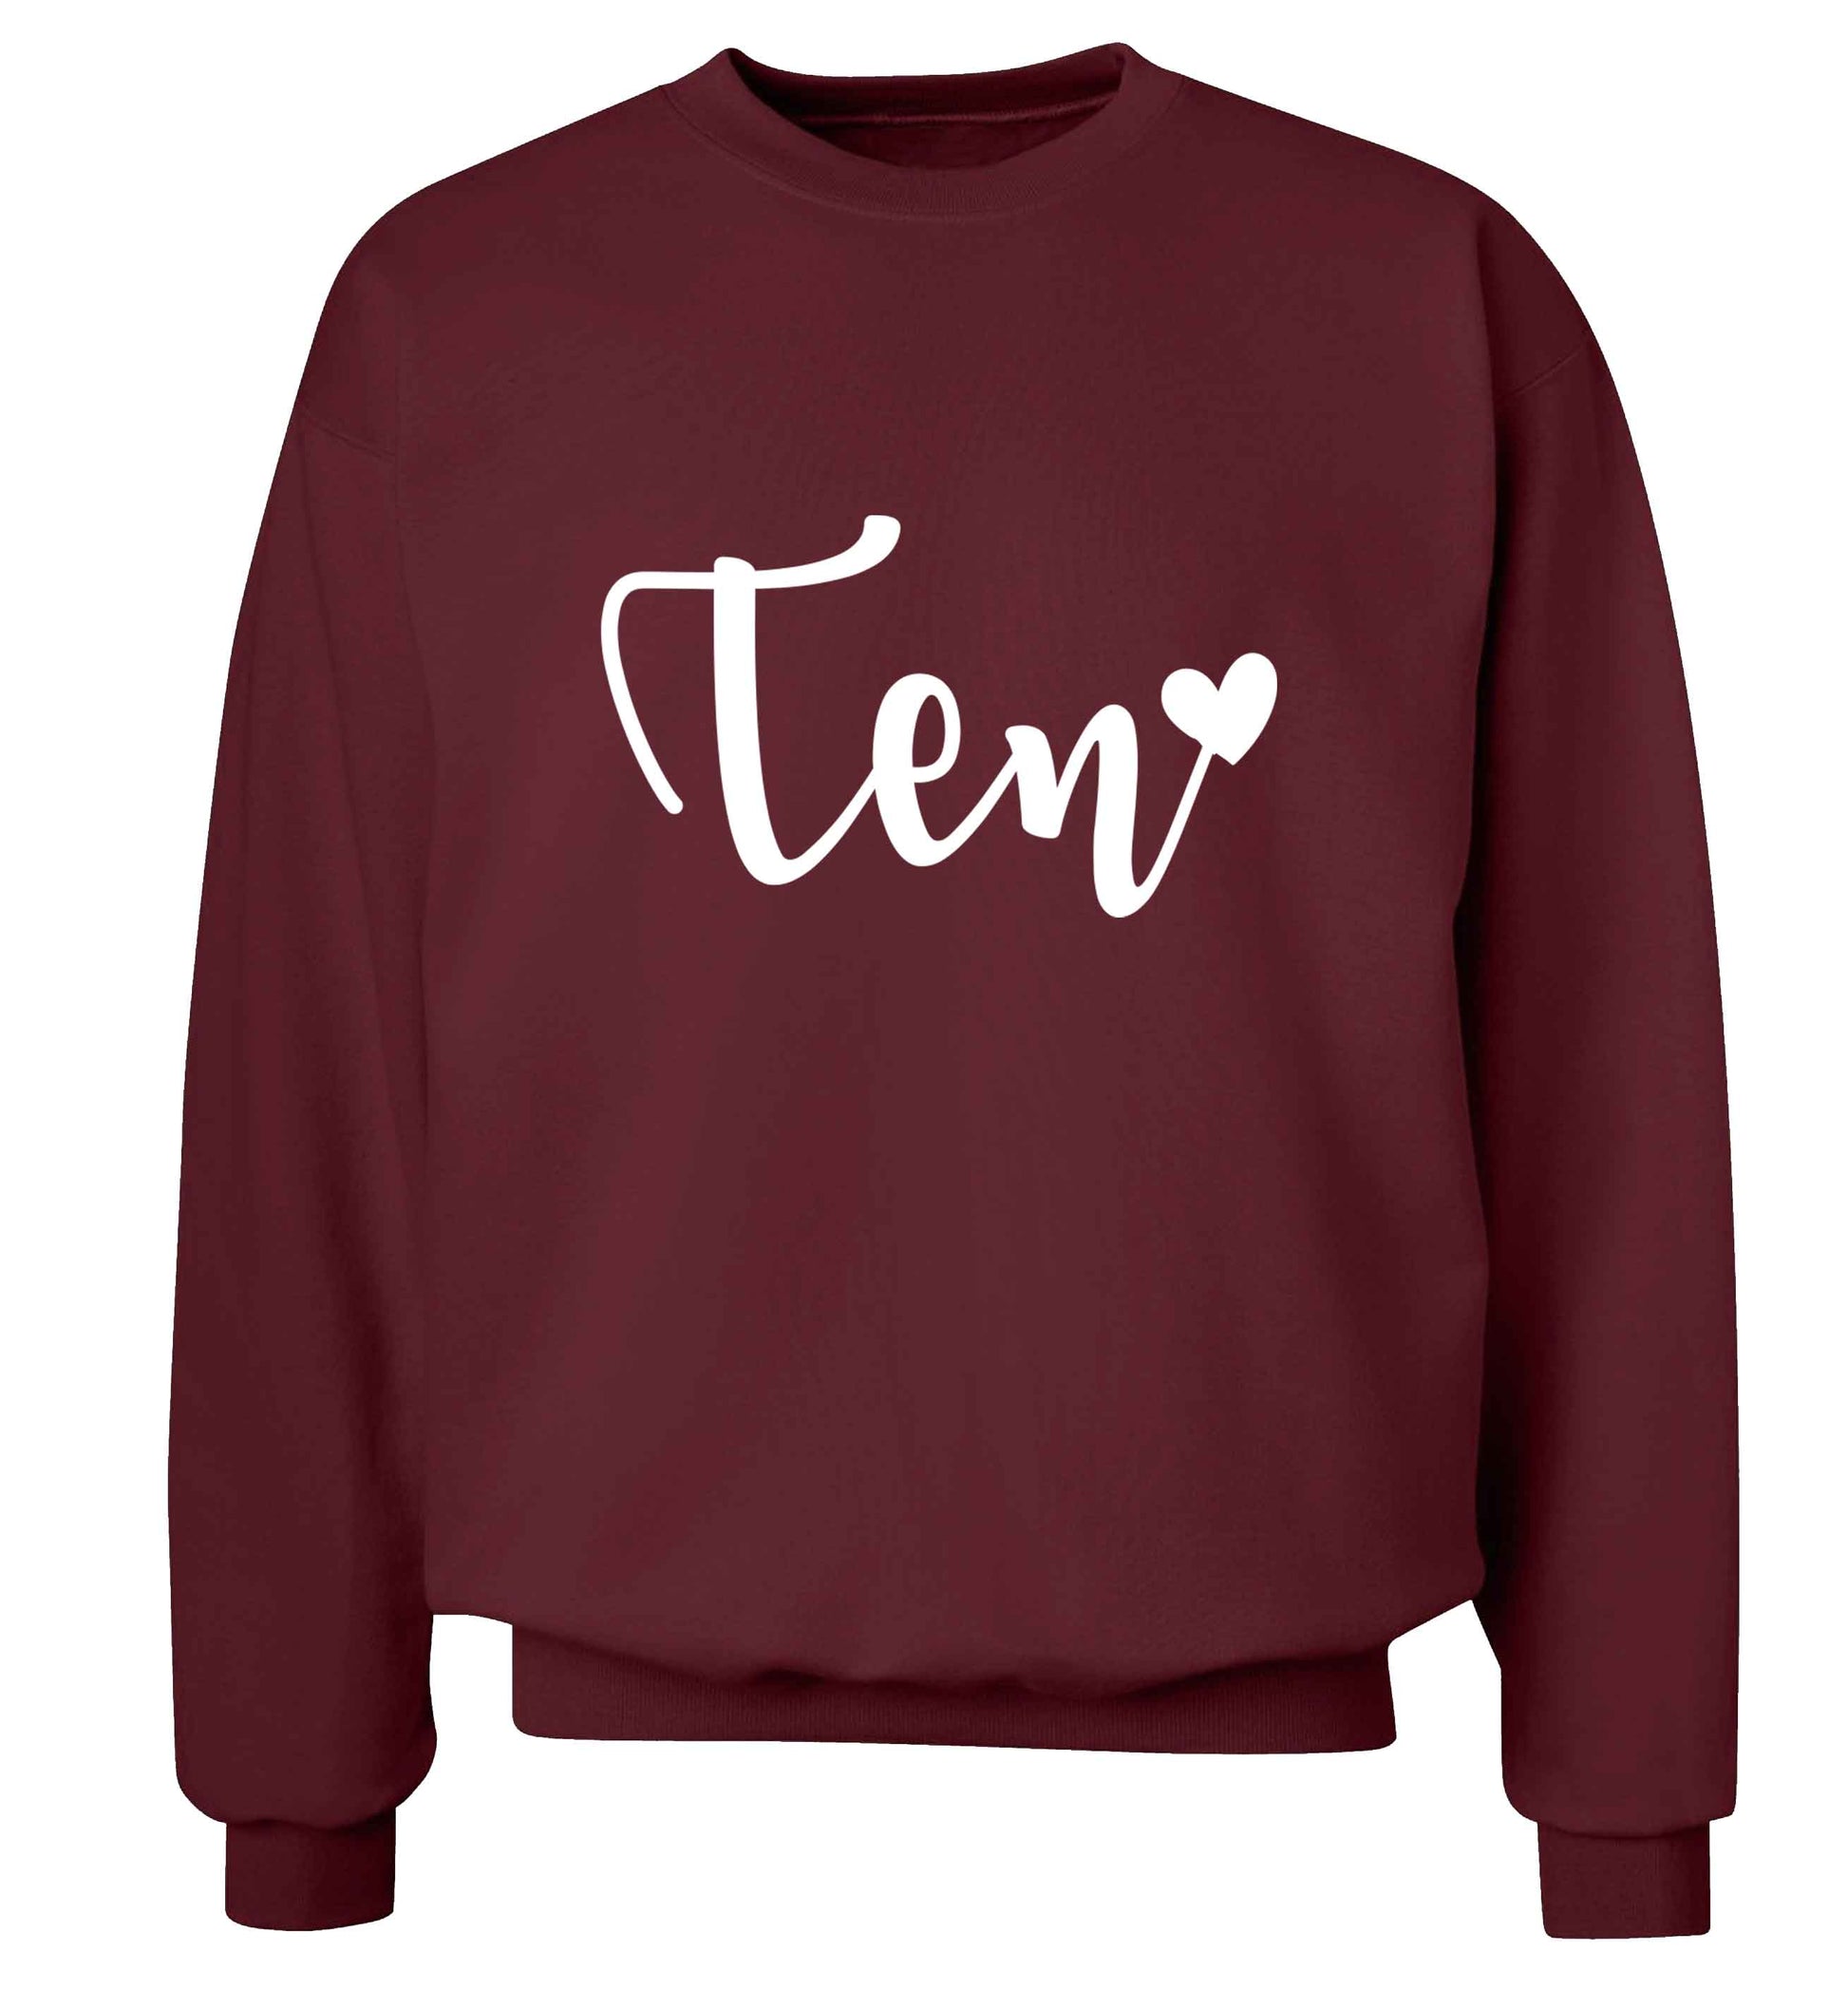 Rose gold eleven adult's unisex maroon sweater 2XL